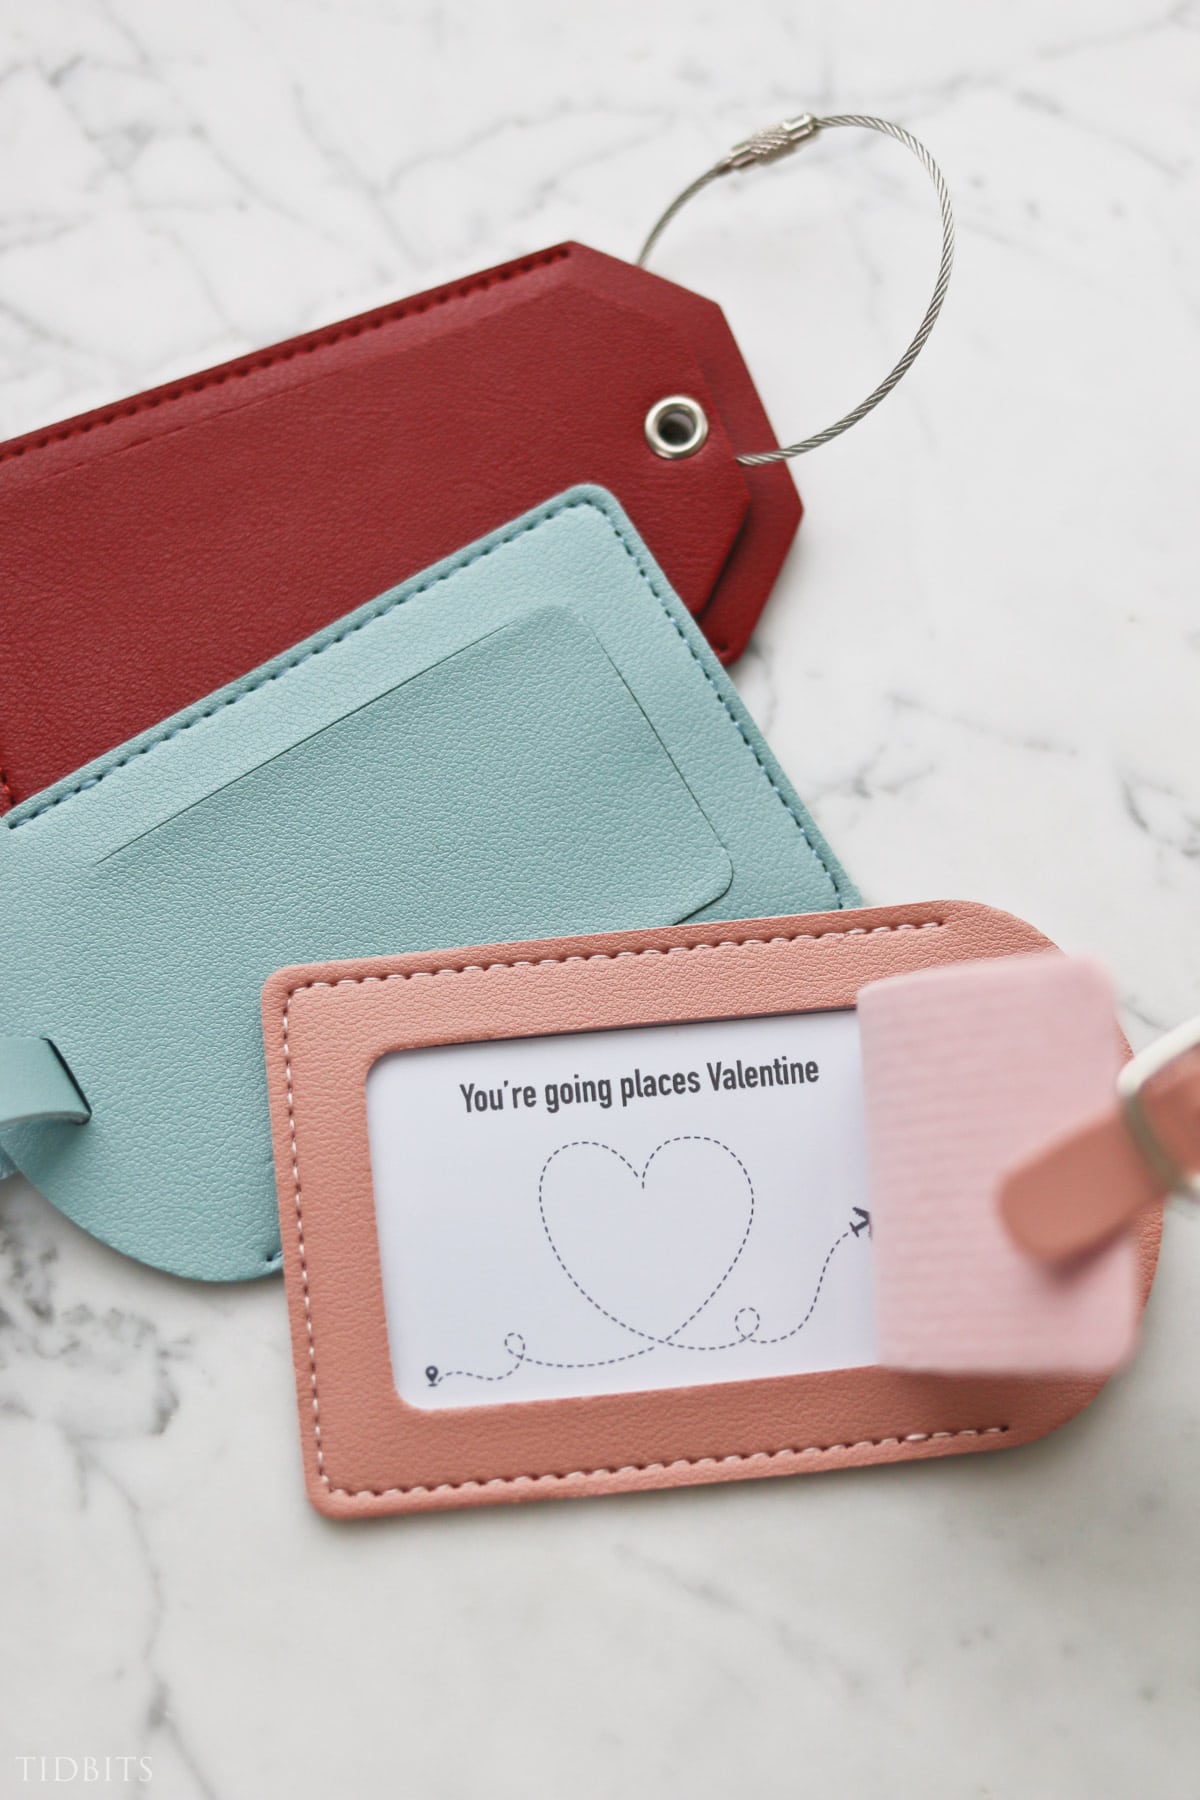 No Candy Valentines Idea with a luggage tag - "You are going places Valentine"